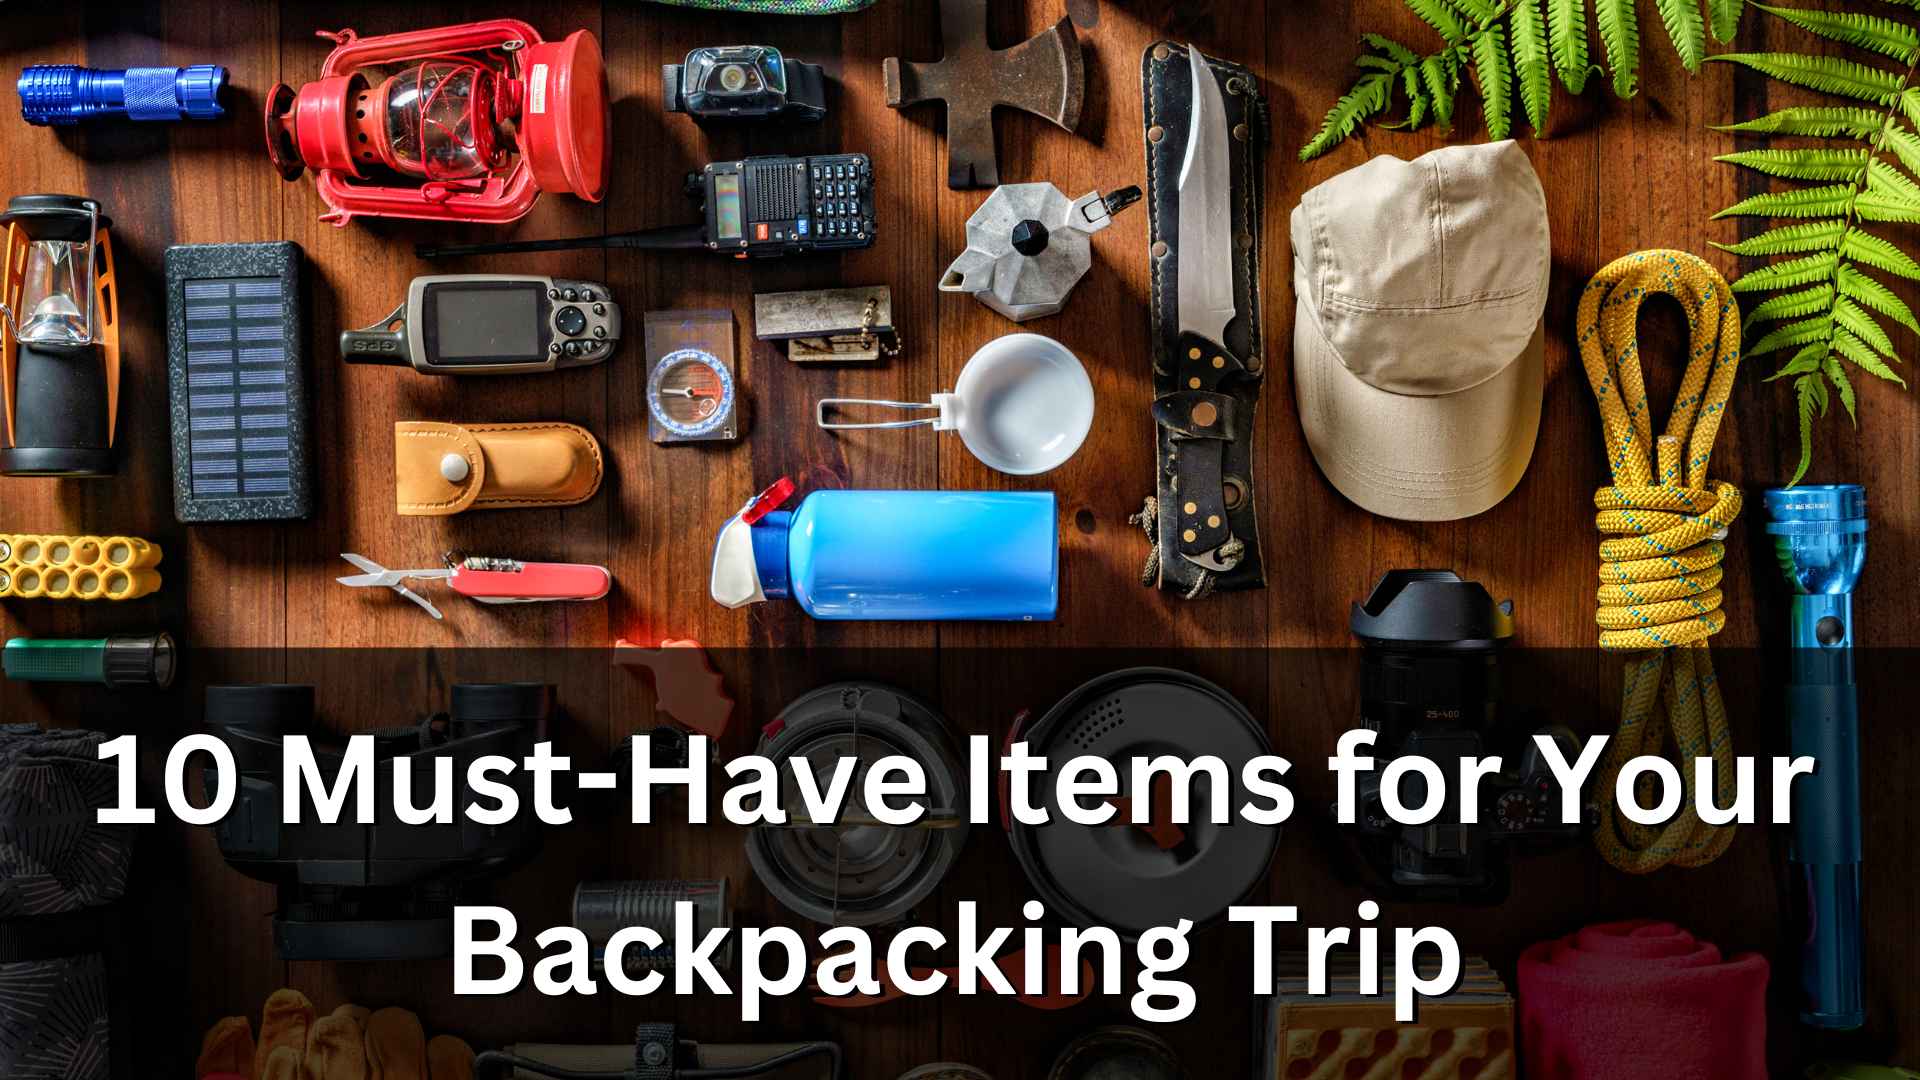 10 Must-Have Items for Your Backpacking Trip